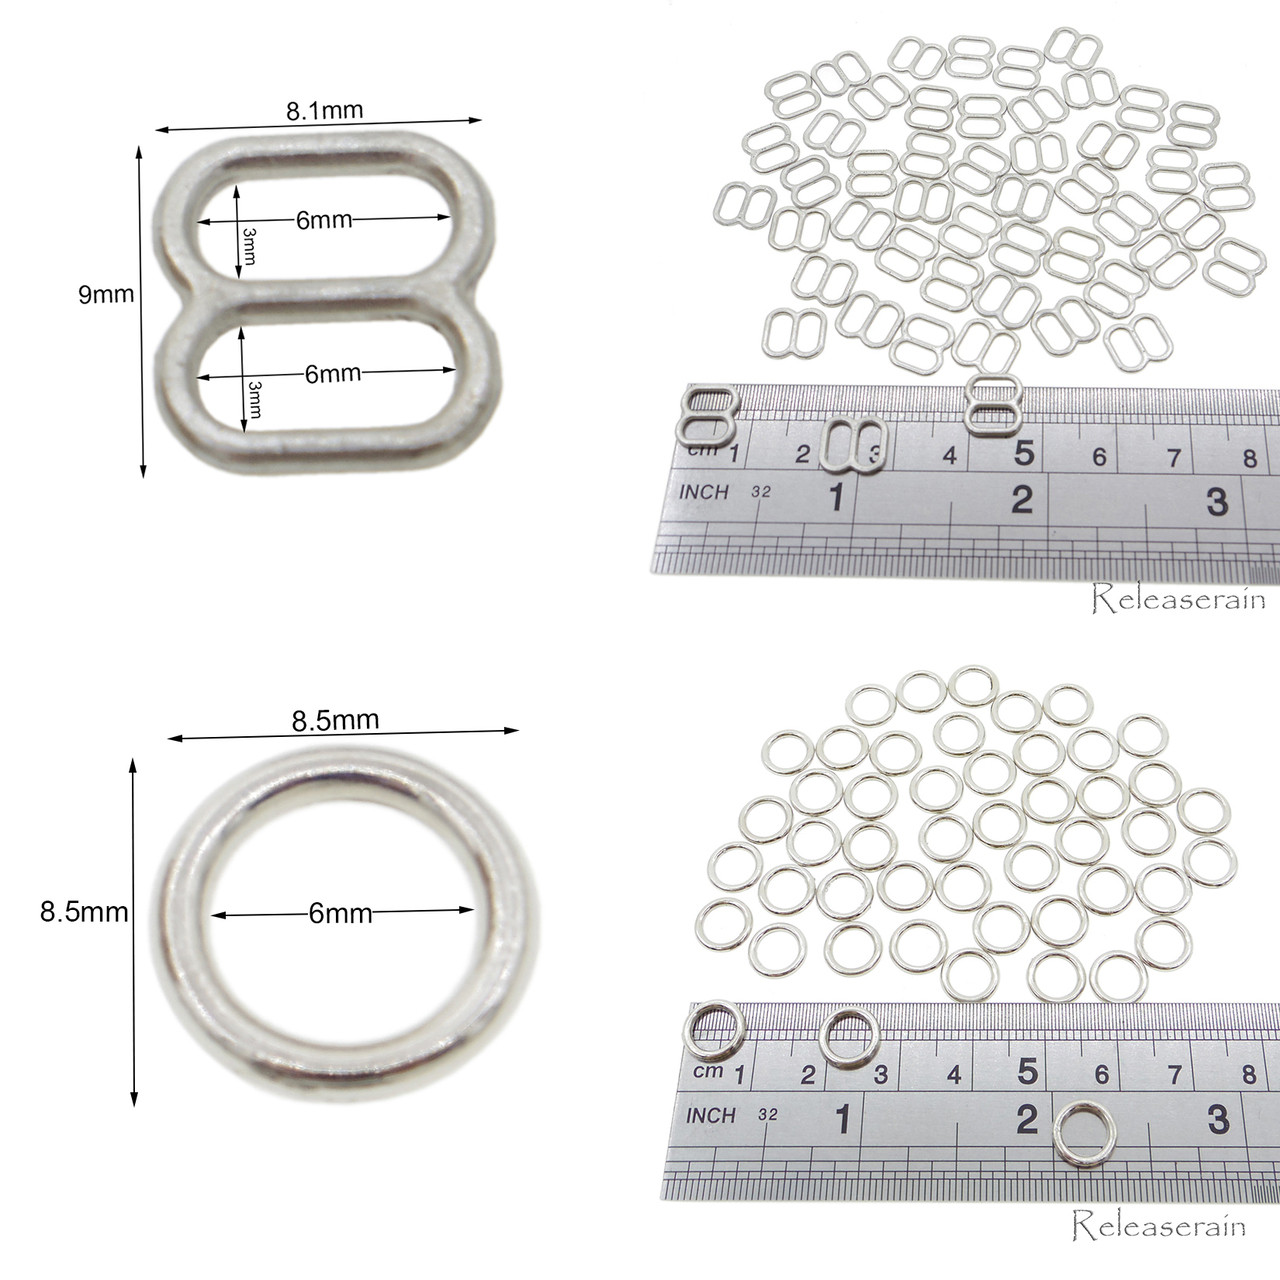 6mm Inner Diameter Silver DIY Doll Clothes Metal Sewing Bra Lingerie Sliders  50 Pieces + O Rings 50 Pieces - Releaserain